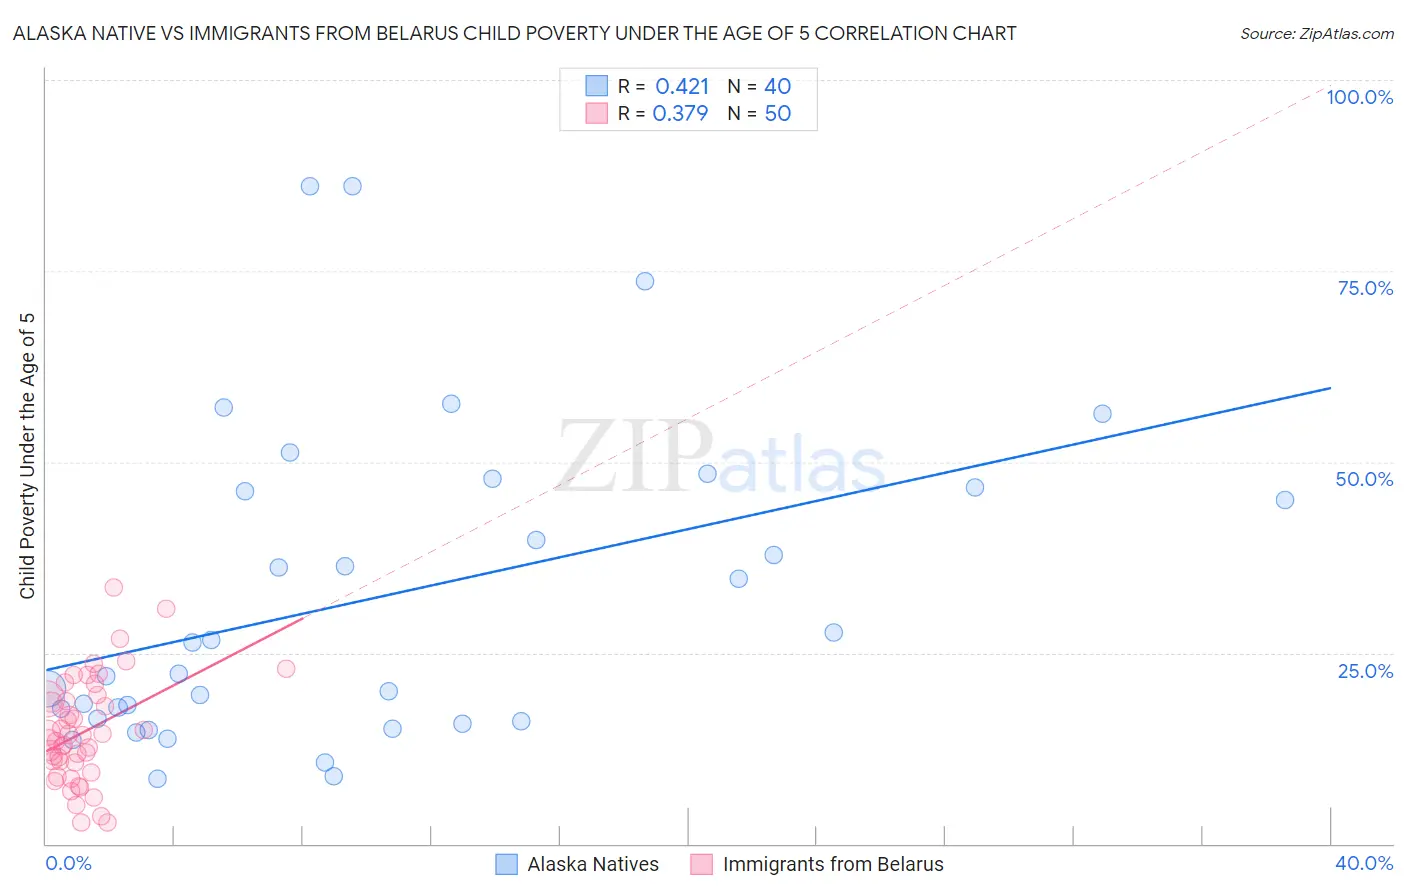 Alaska Native vs Immigrants from Belarus Child Poverty Under the Age of 5